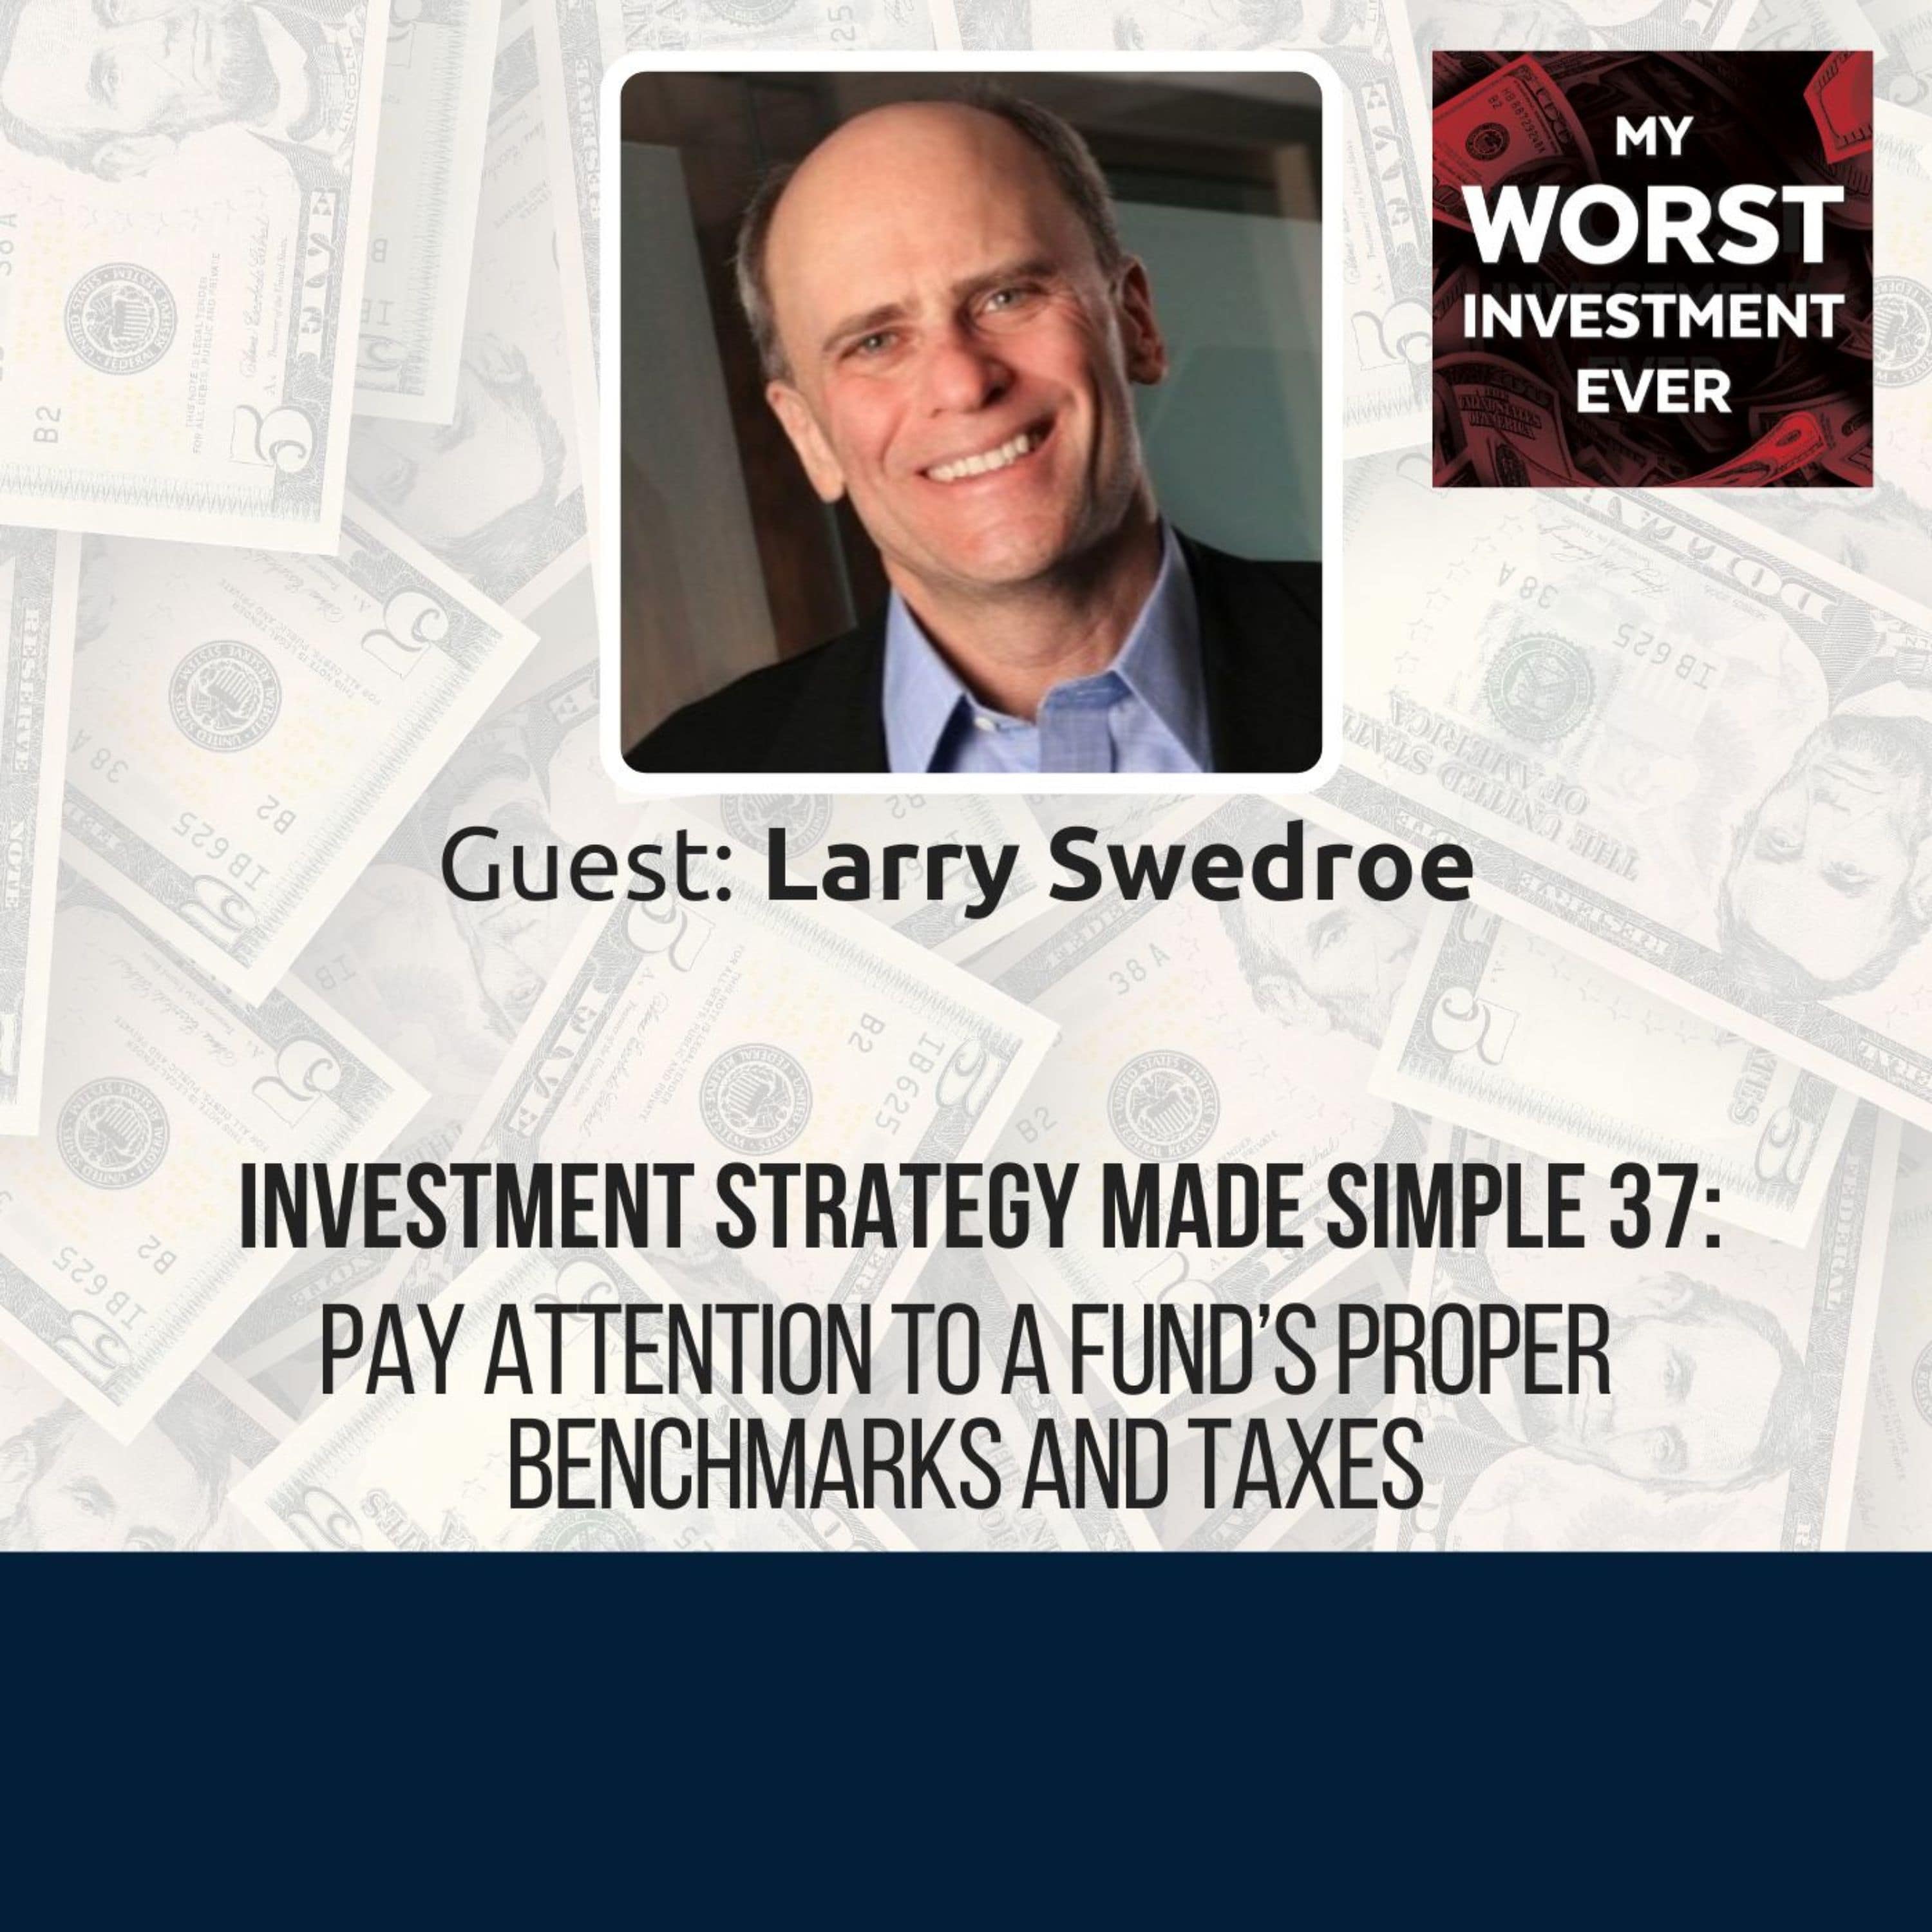 ISMS 37: Larry Swedroe – Pay Attention to a Fund’s Proper Benchmarks and Taxes